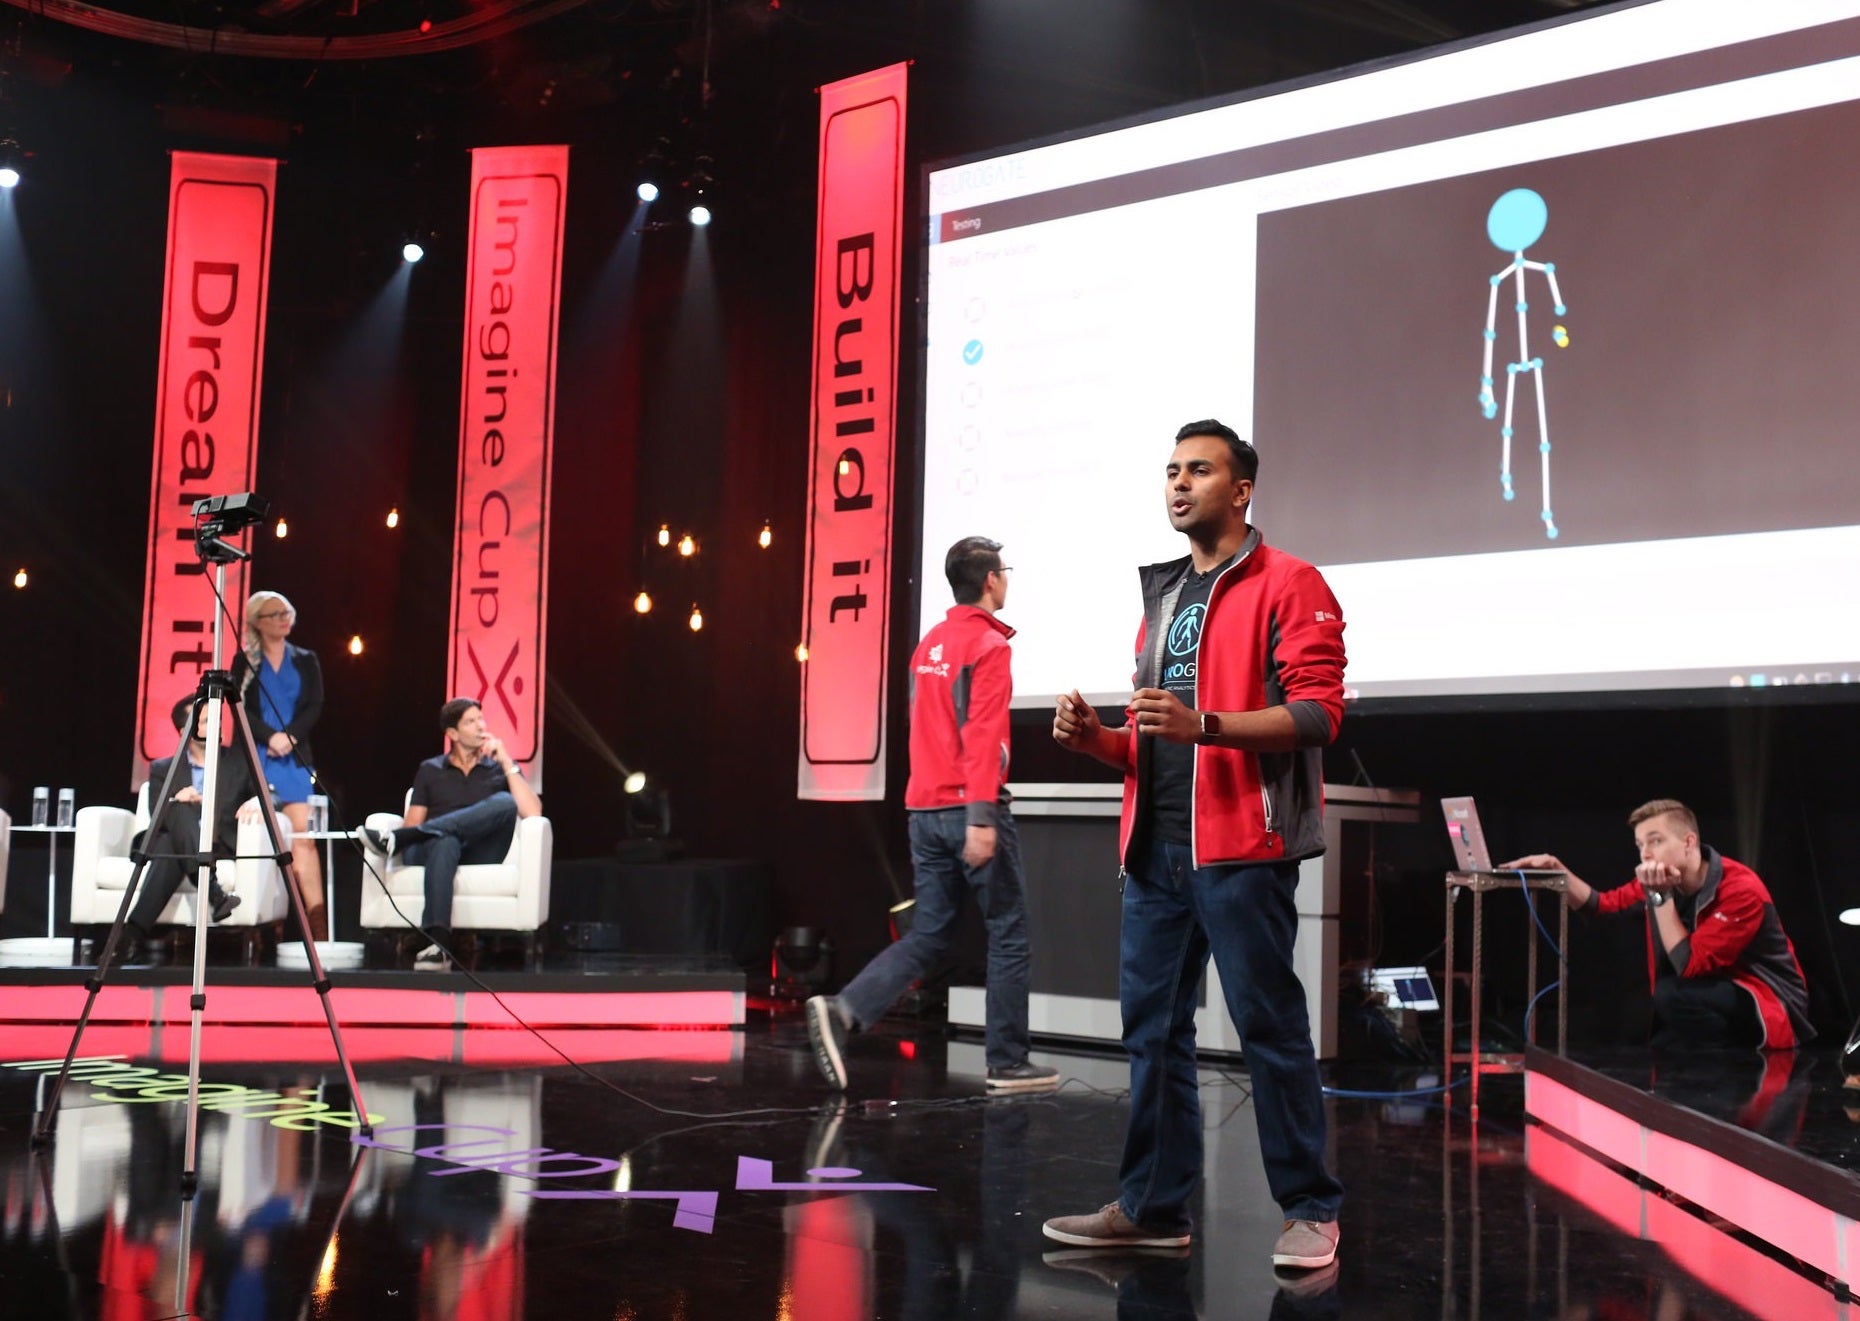 Members of Neurogate make their pitch and give a demonstration during the recent Imagine Cup international finals in Redmond, Washington.